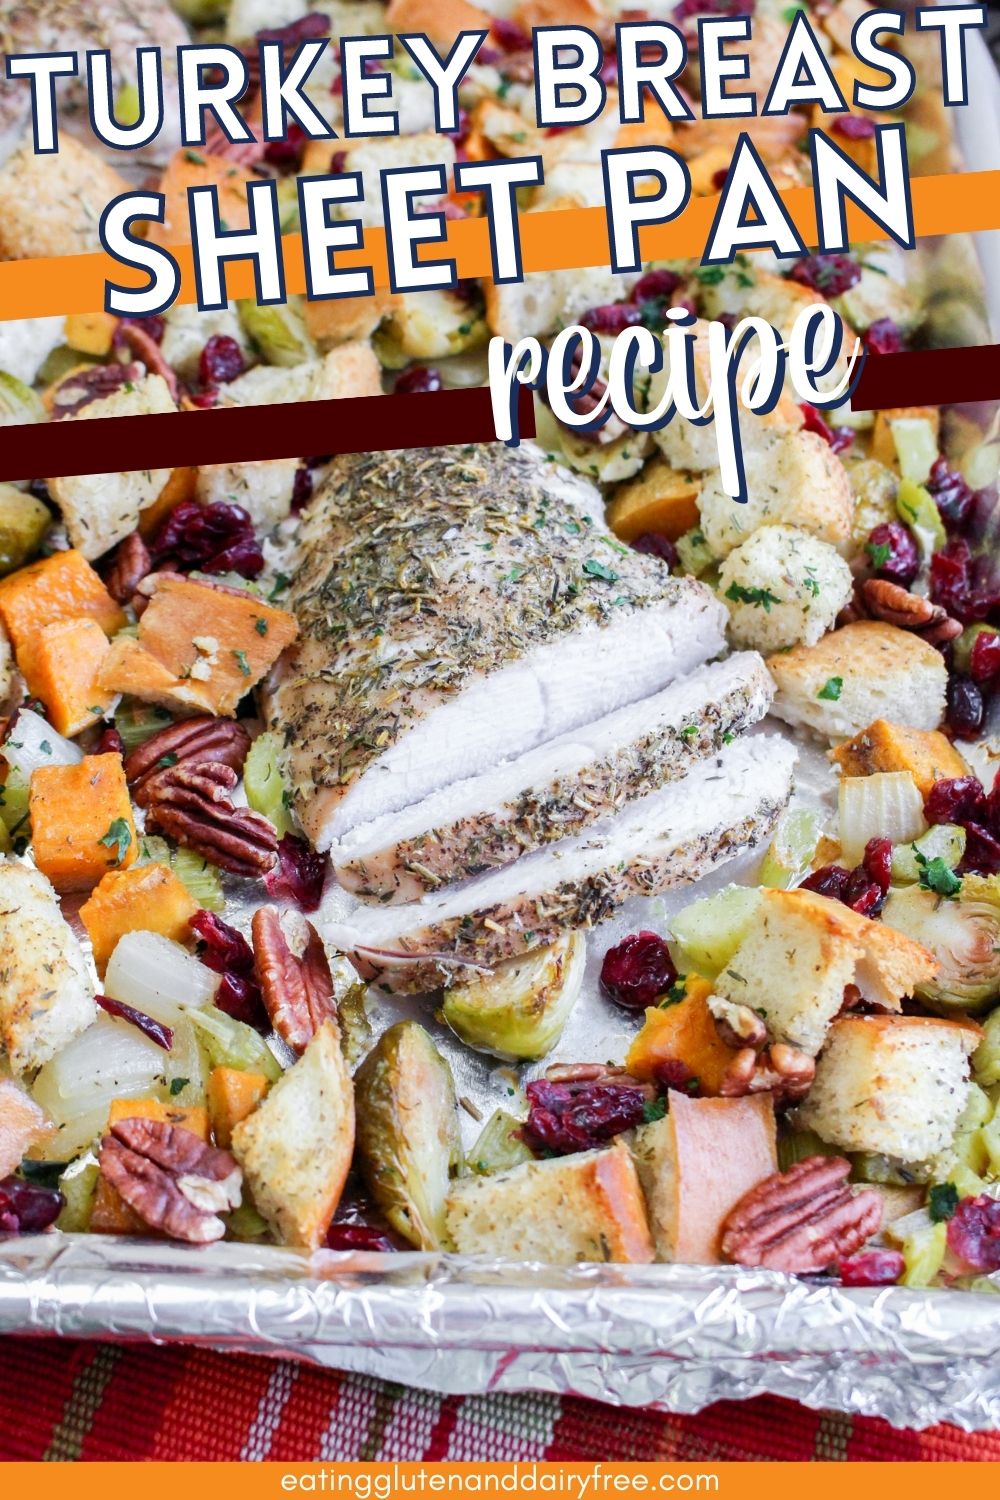 Turkey breast and vegetables with text overlay on a sheet pan.